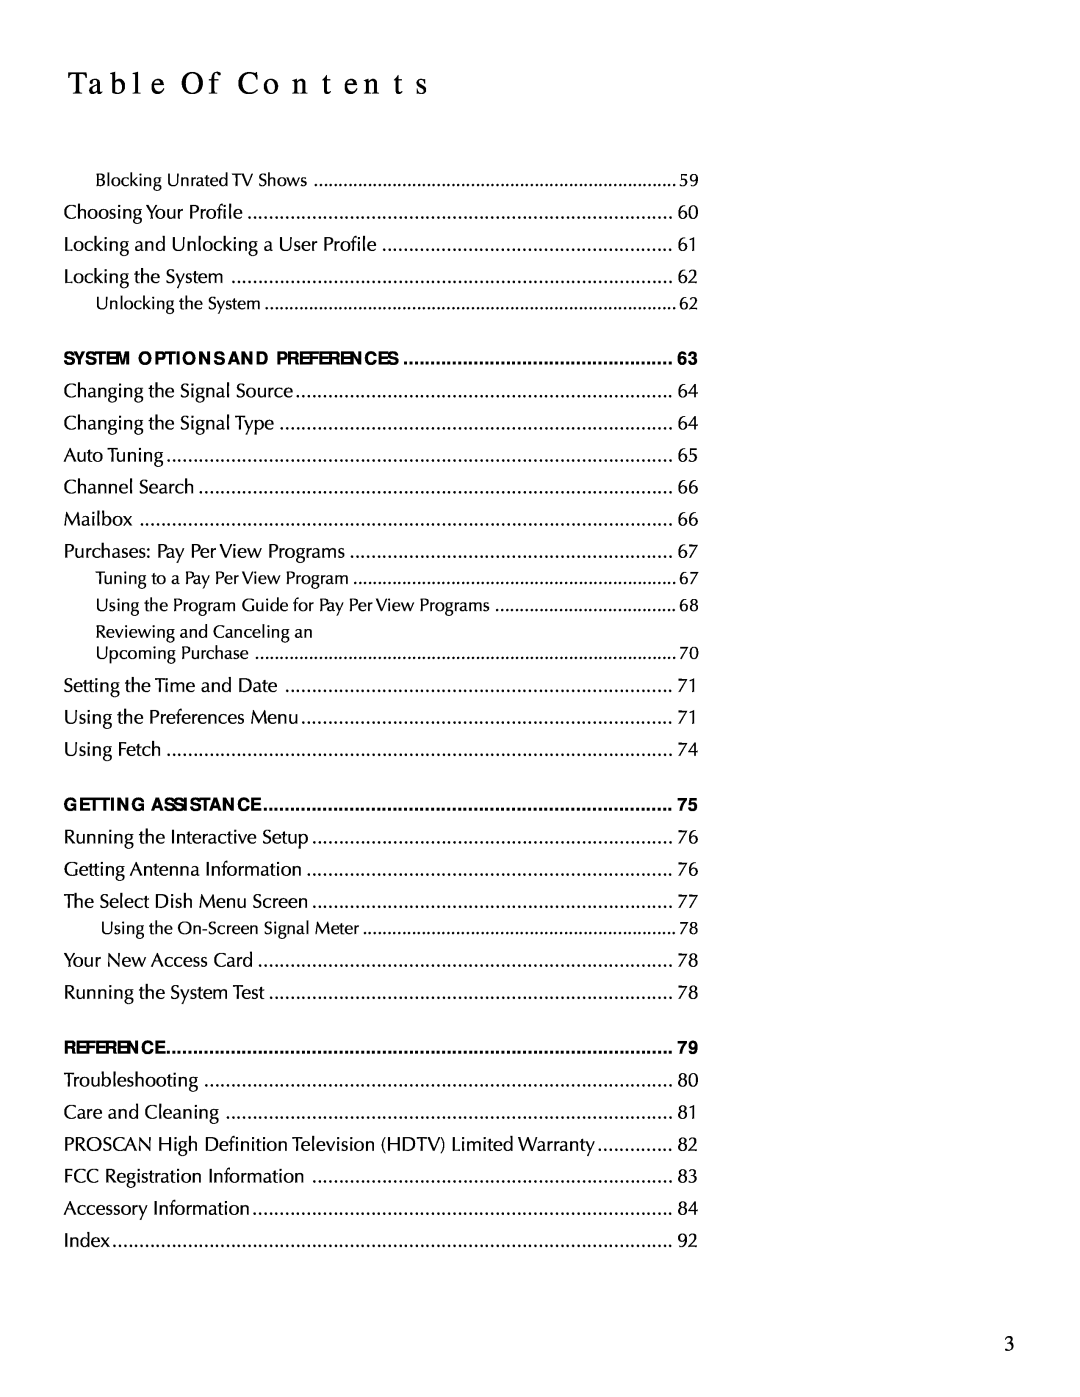 DirecTV HDTV user manual Table Of Contents, Choosing Your Profile 